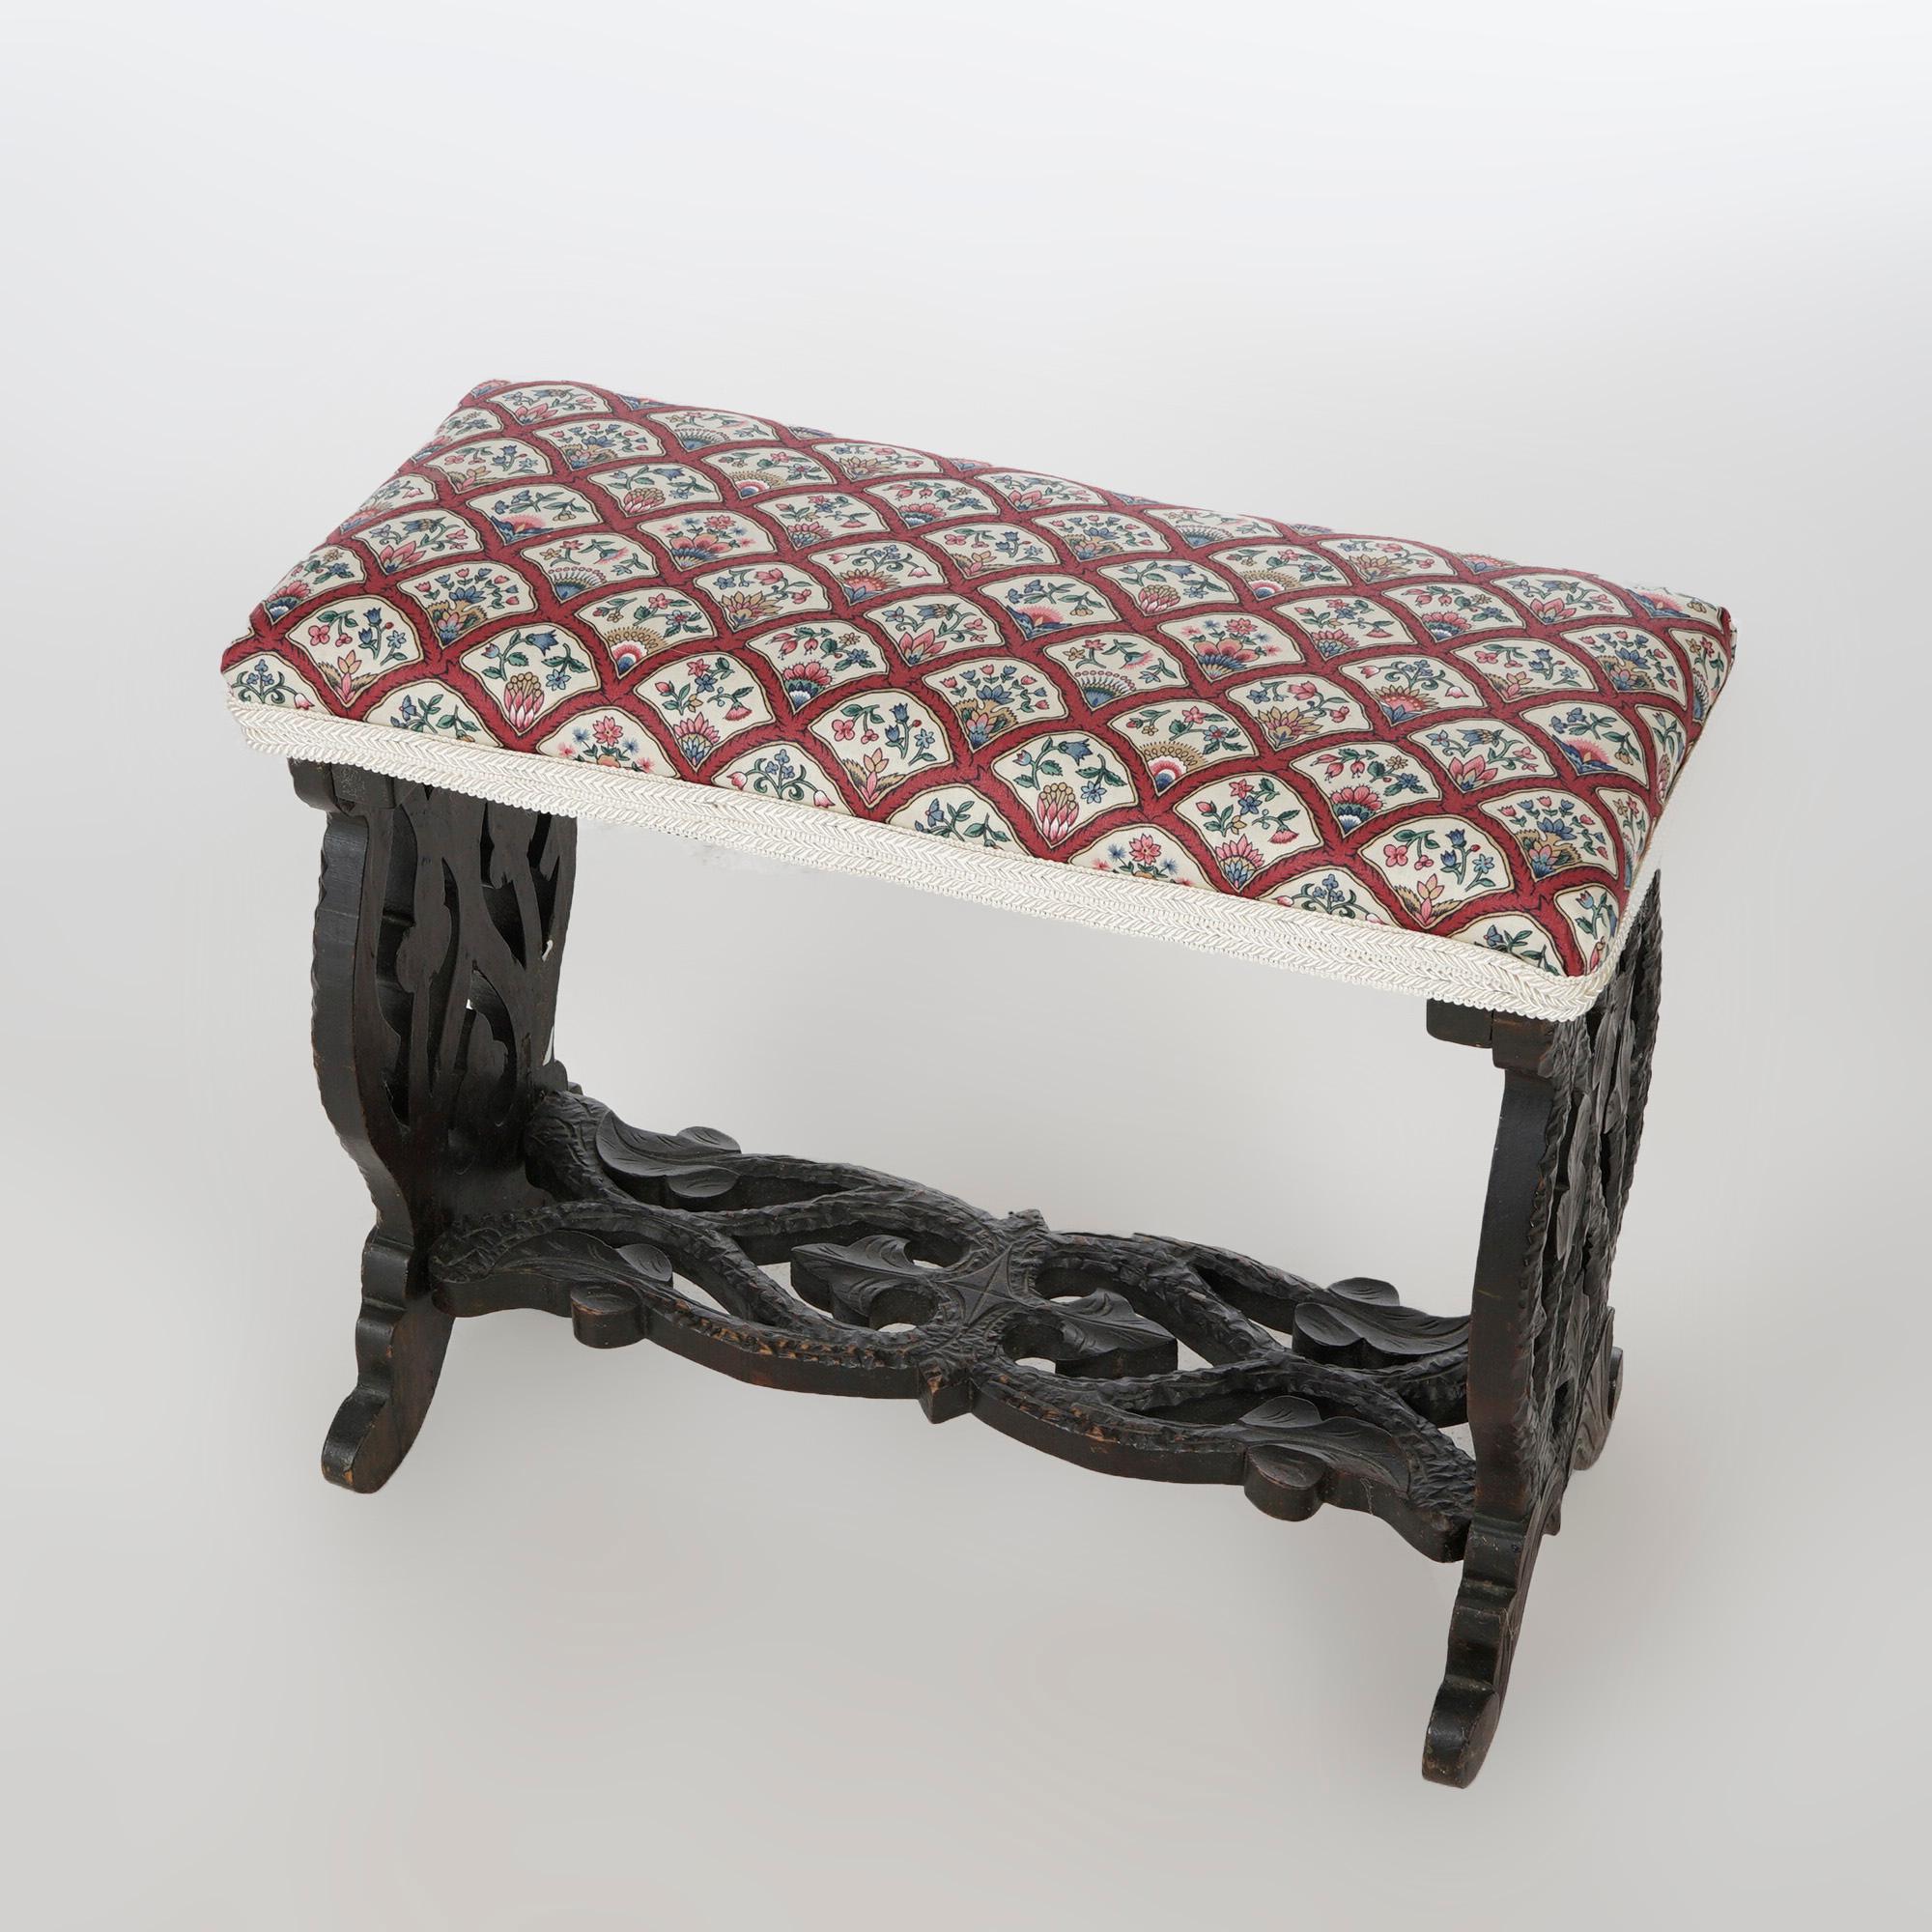 AN antique German Black Forest style bench offers upholstered seat over foliate carved trestle form base, c1890

Measures- 19''H x 22.75''W x 10.5''D.

Catalogue Note: Ask about DISCOUNTED DELIVERY RATES available to most regions within 1,500